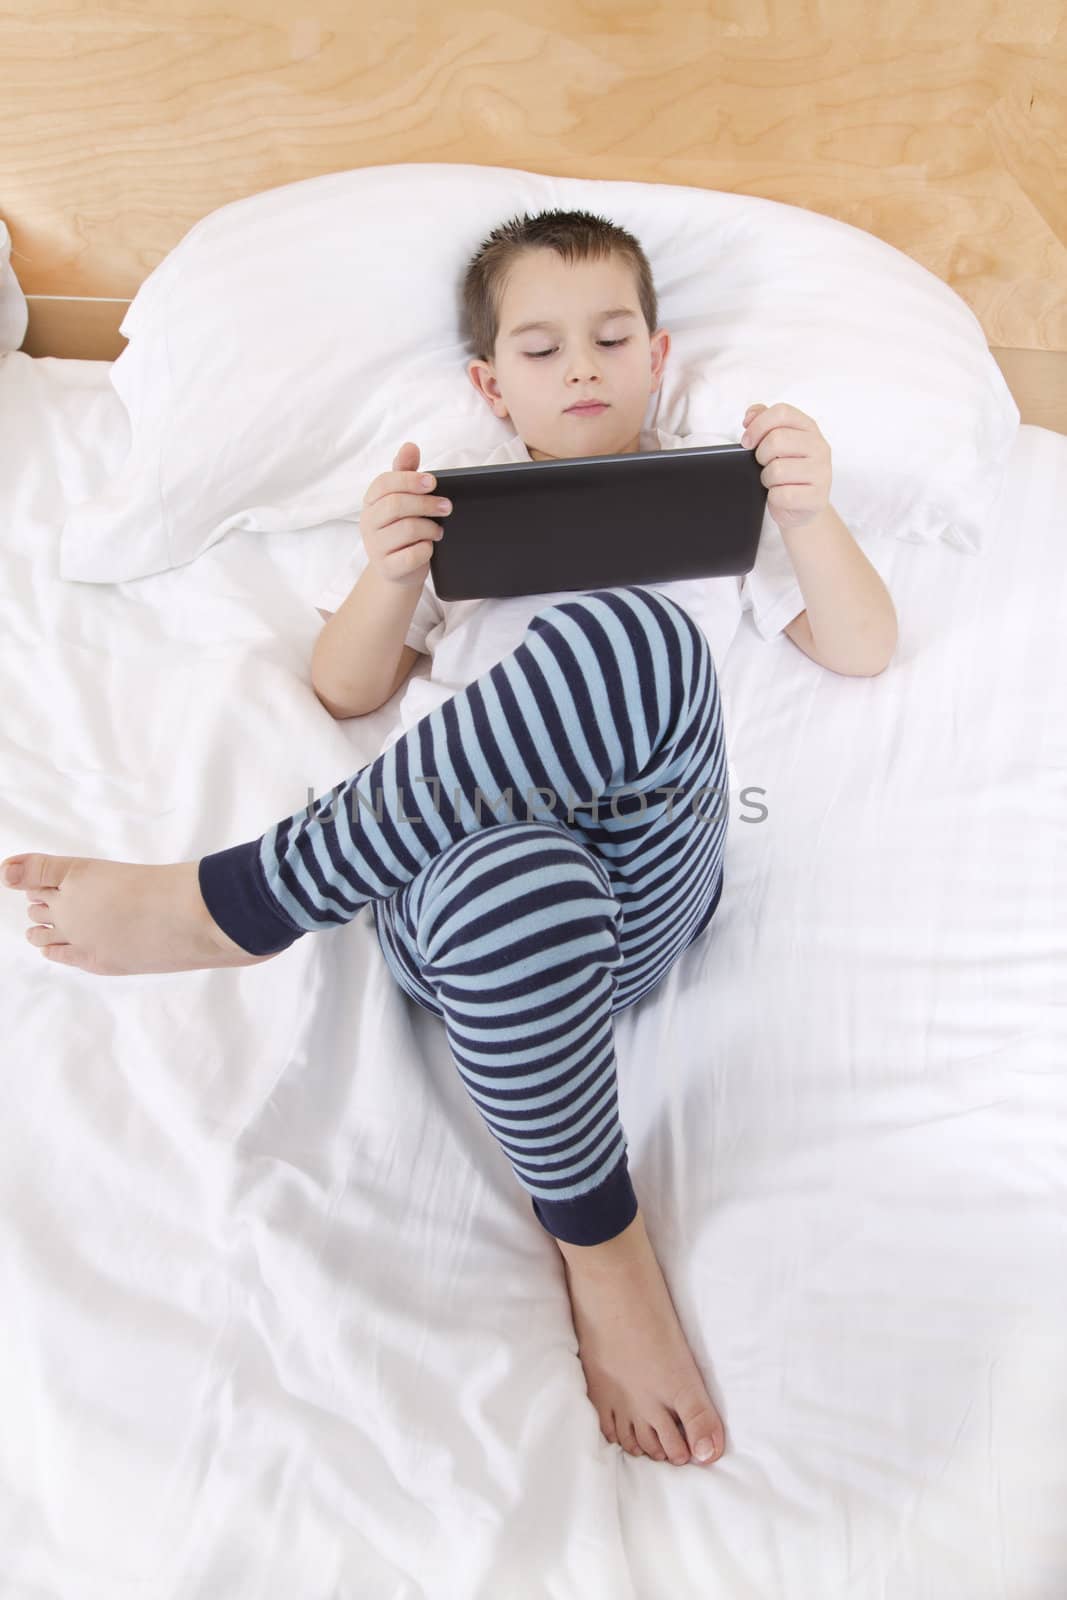 Elementry school boy reading his tablet before he goes to bed